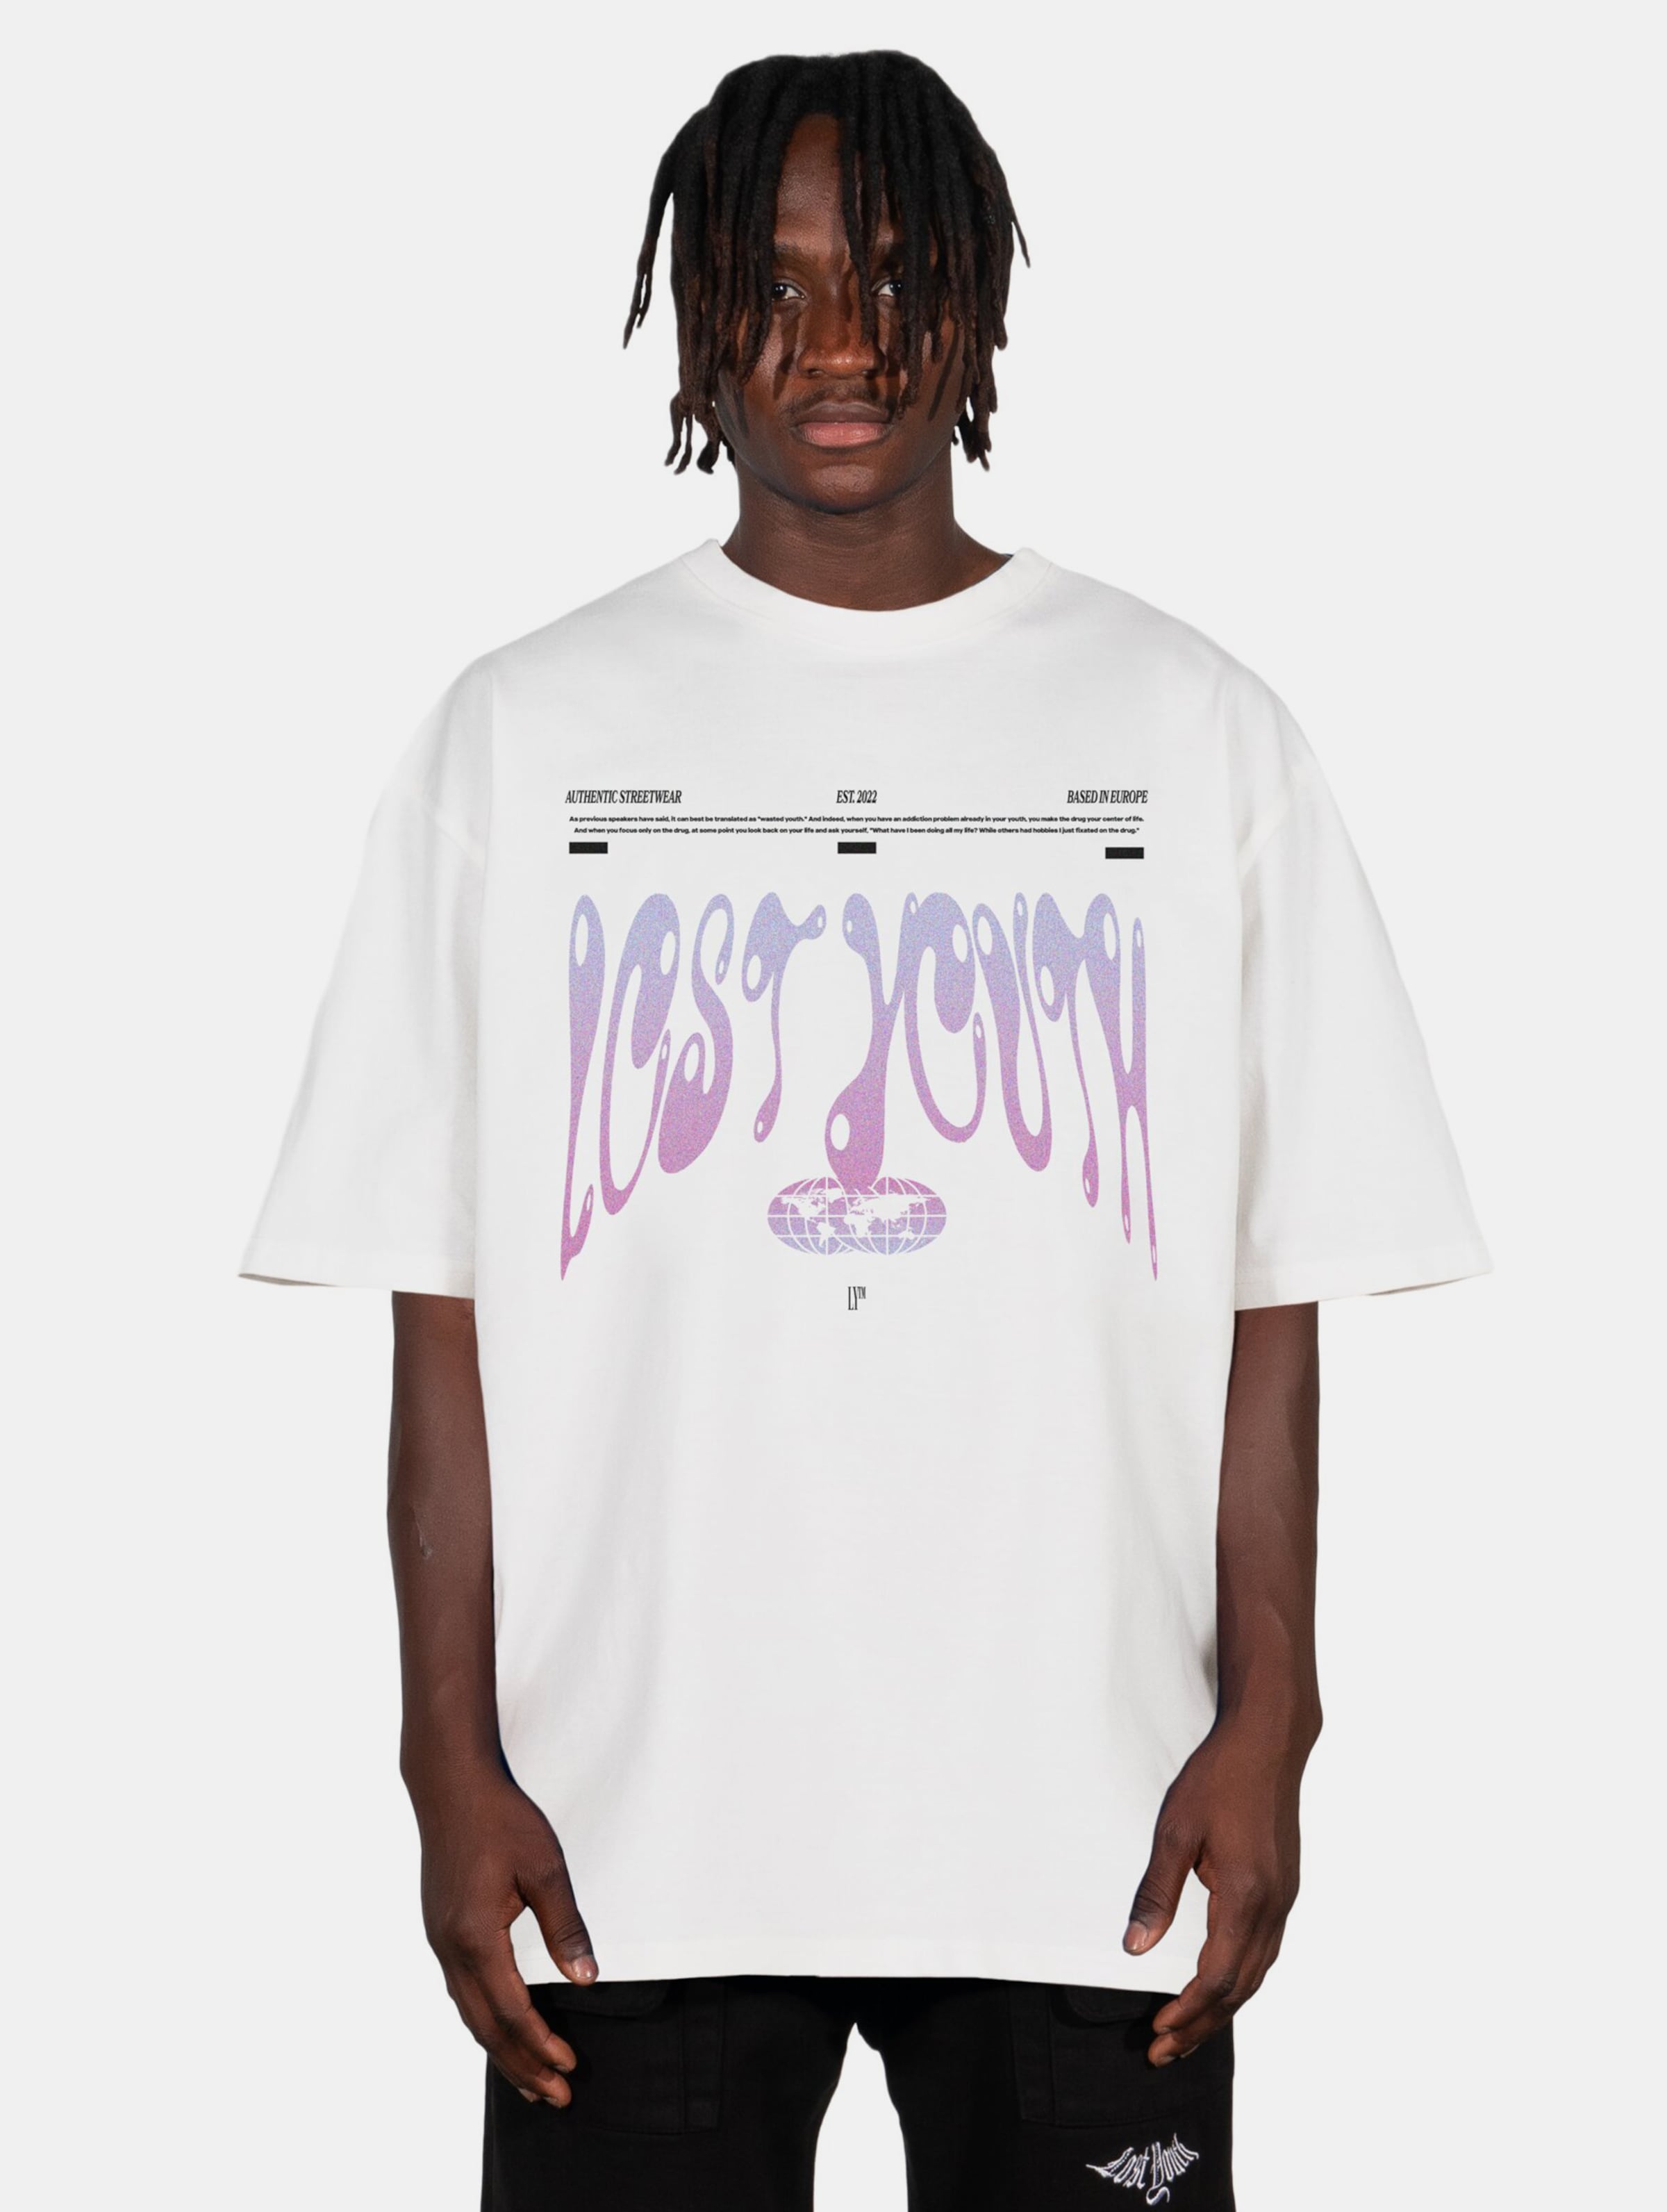 Lost Youth LY TEE- AUTHENTIC Männer,Unisex op kleur wit, Maat XL